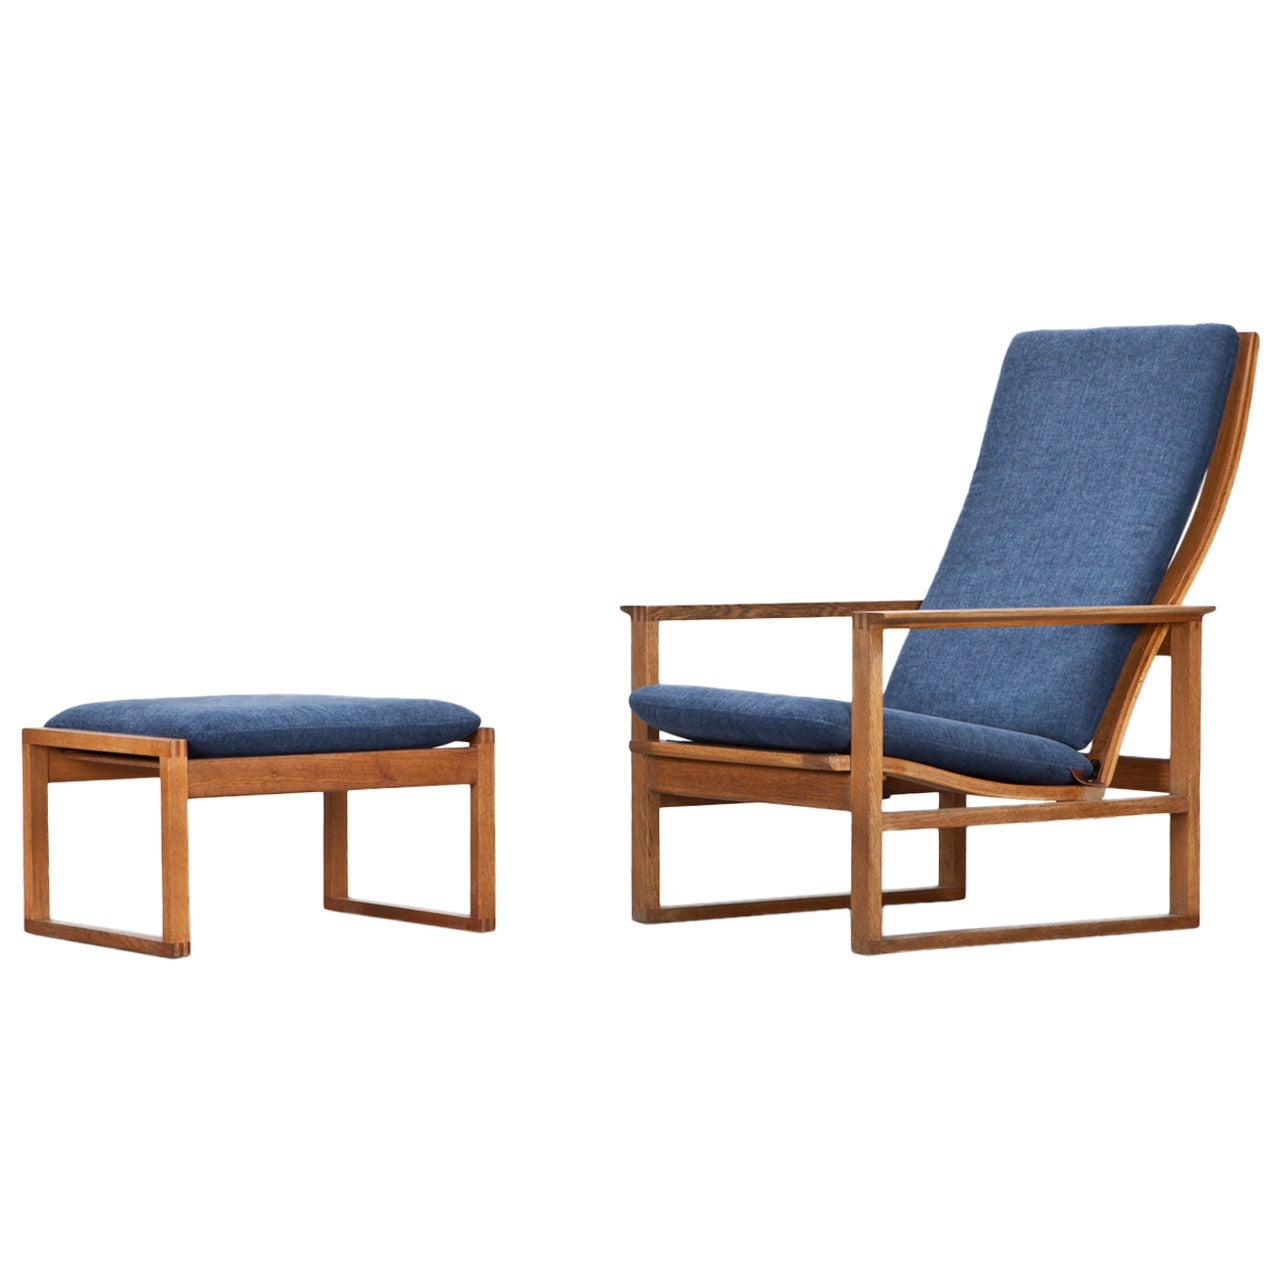 1950s Blue Cushions, Oak Frame Lounge Chair with Ottoman by Børge Mogensen 